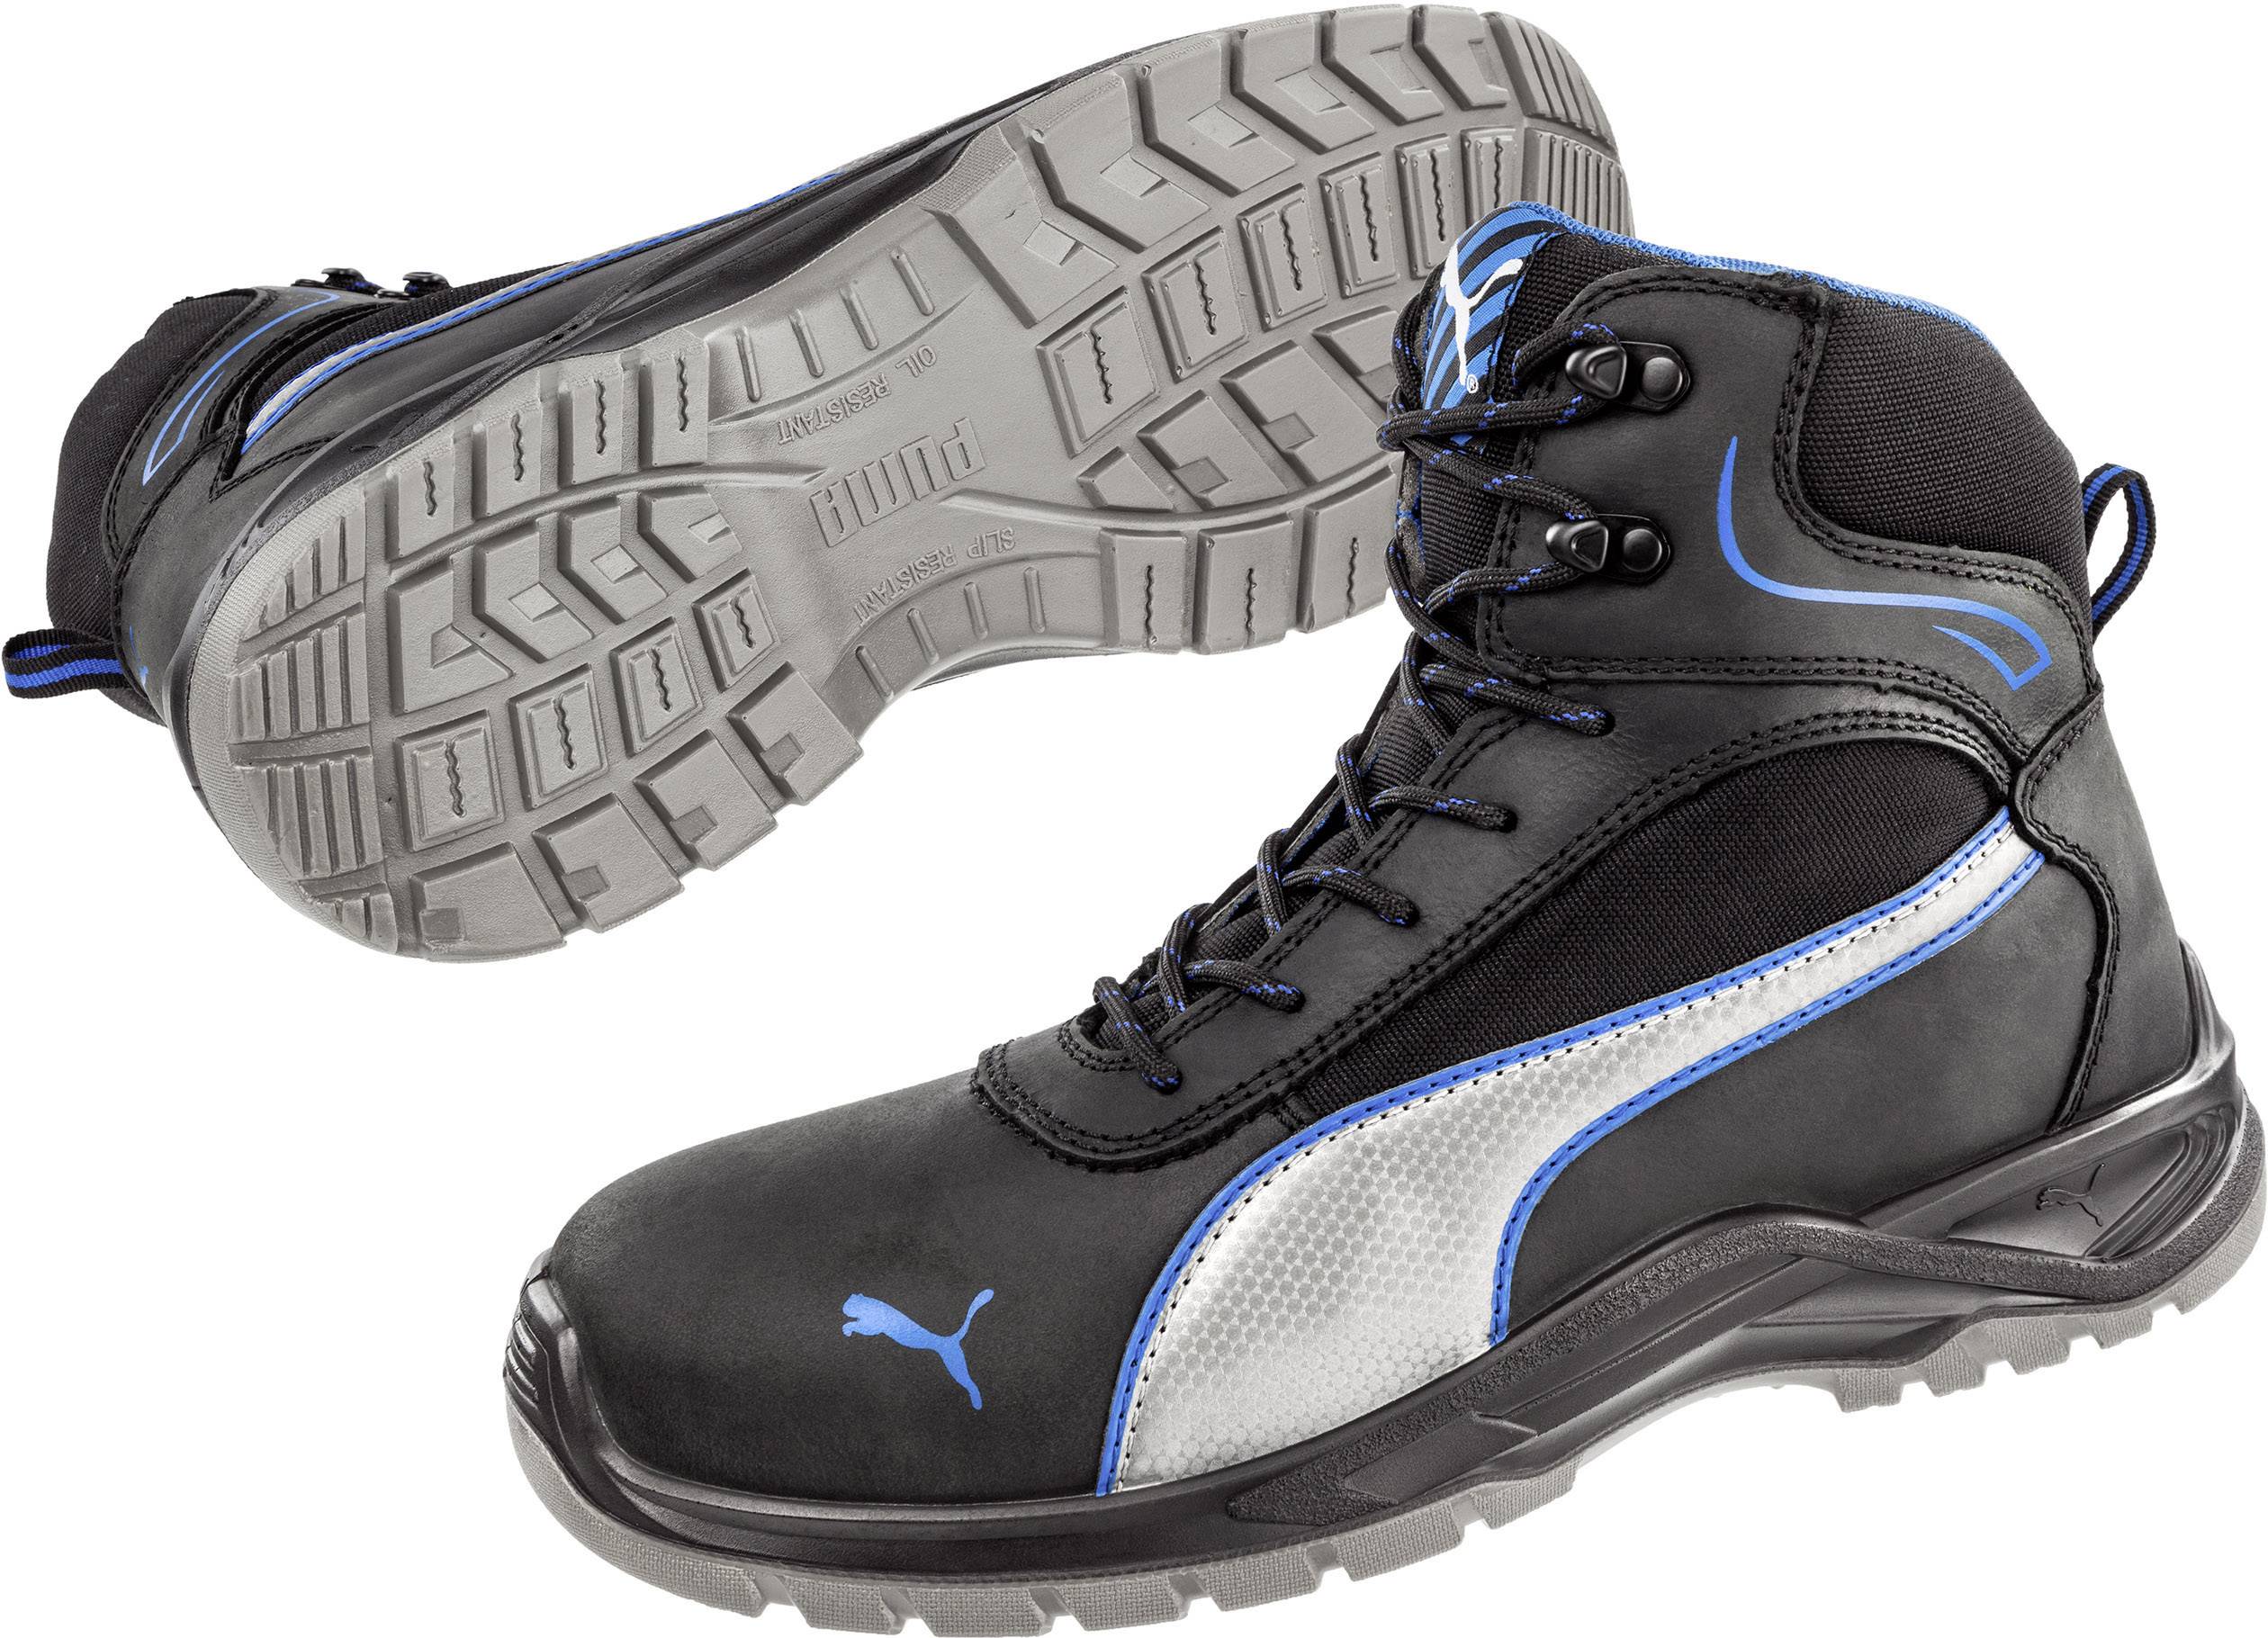 puma safety boots review